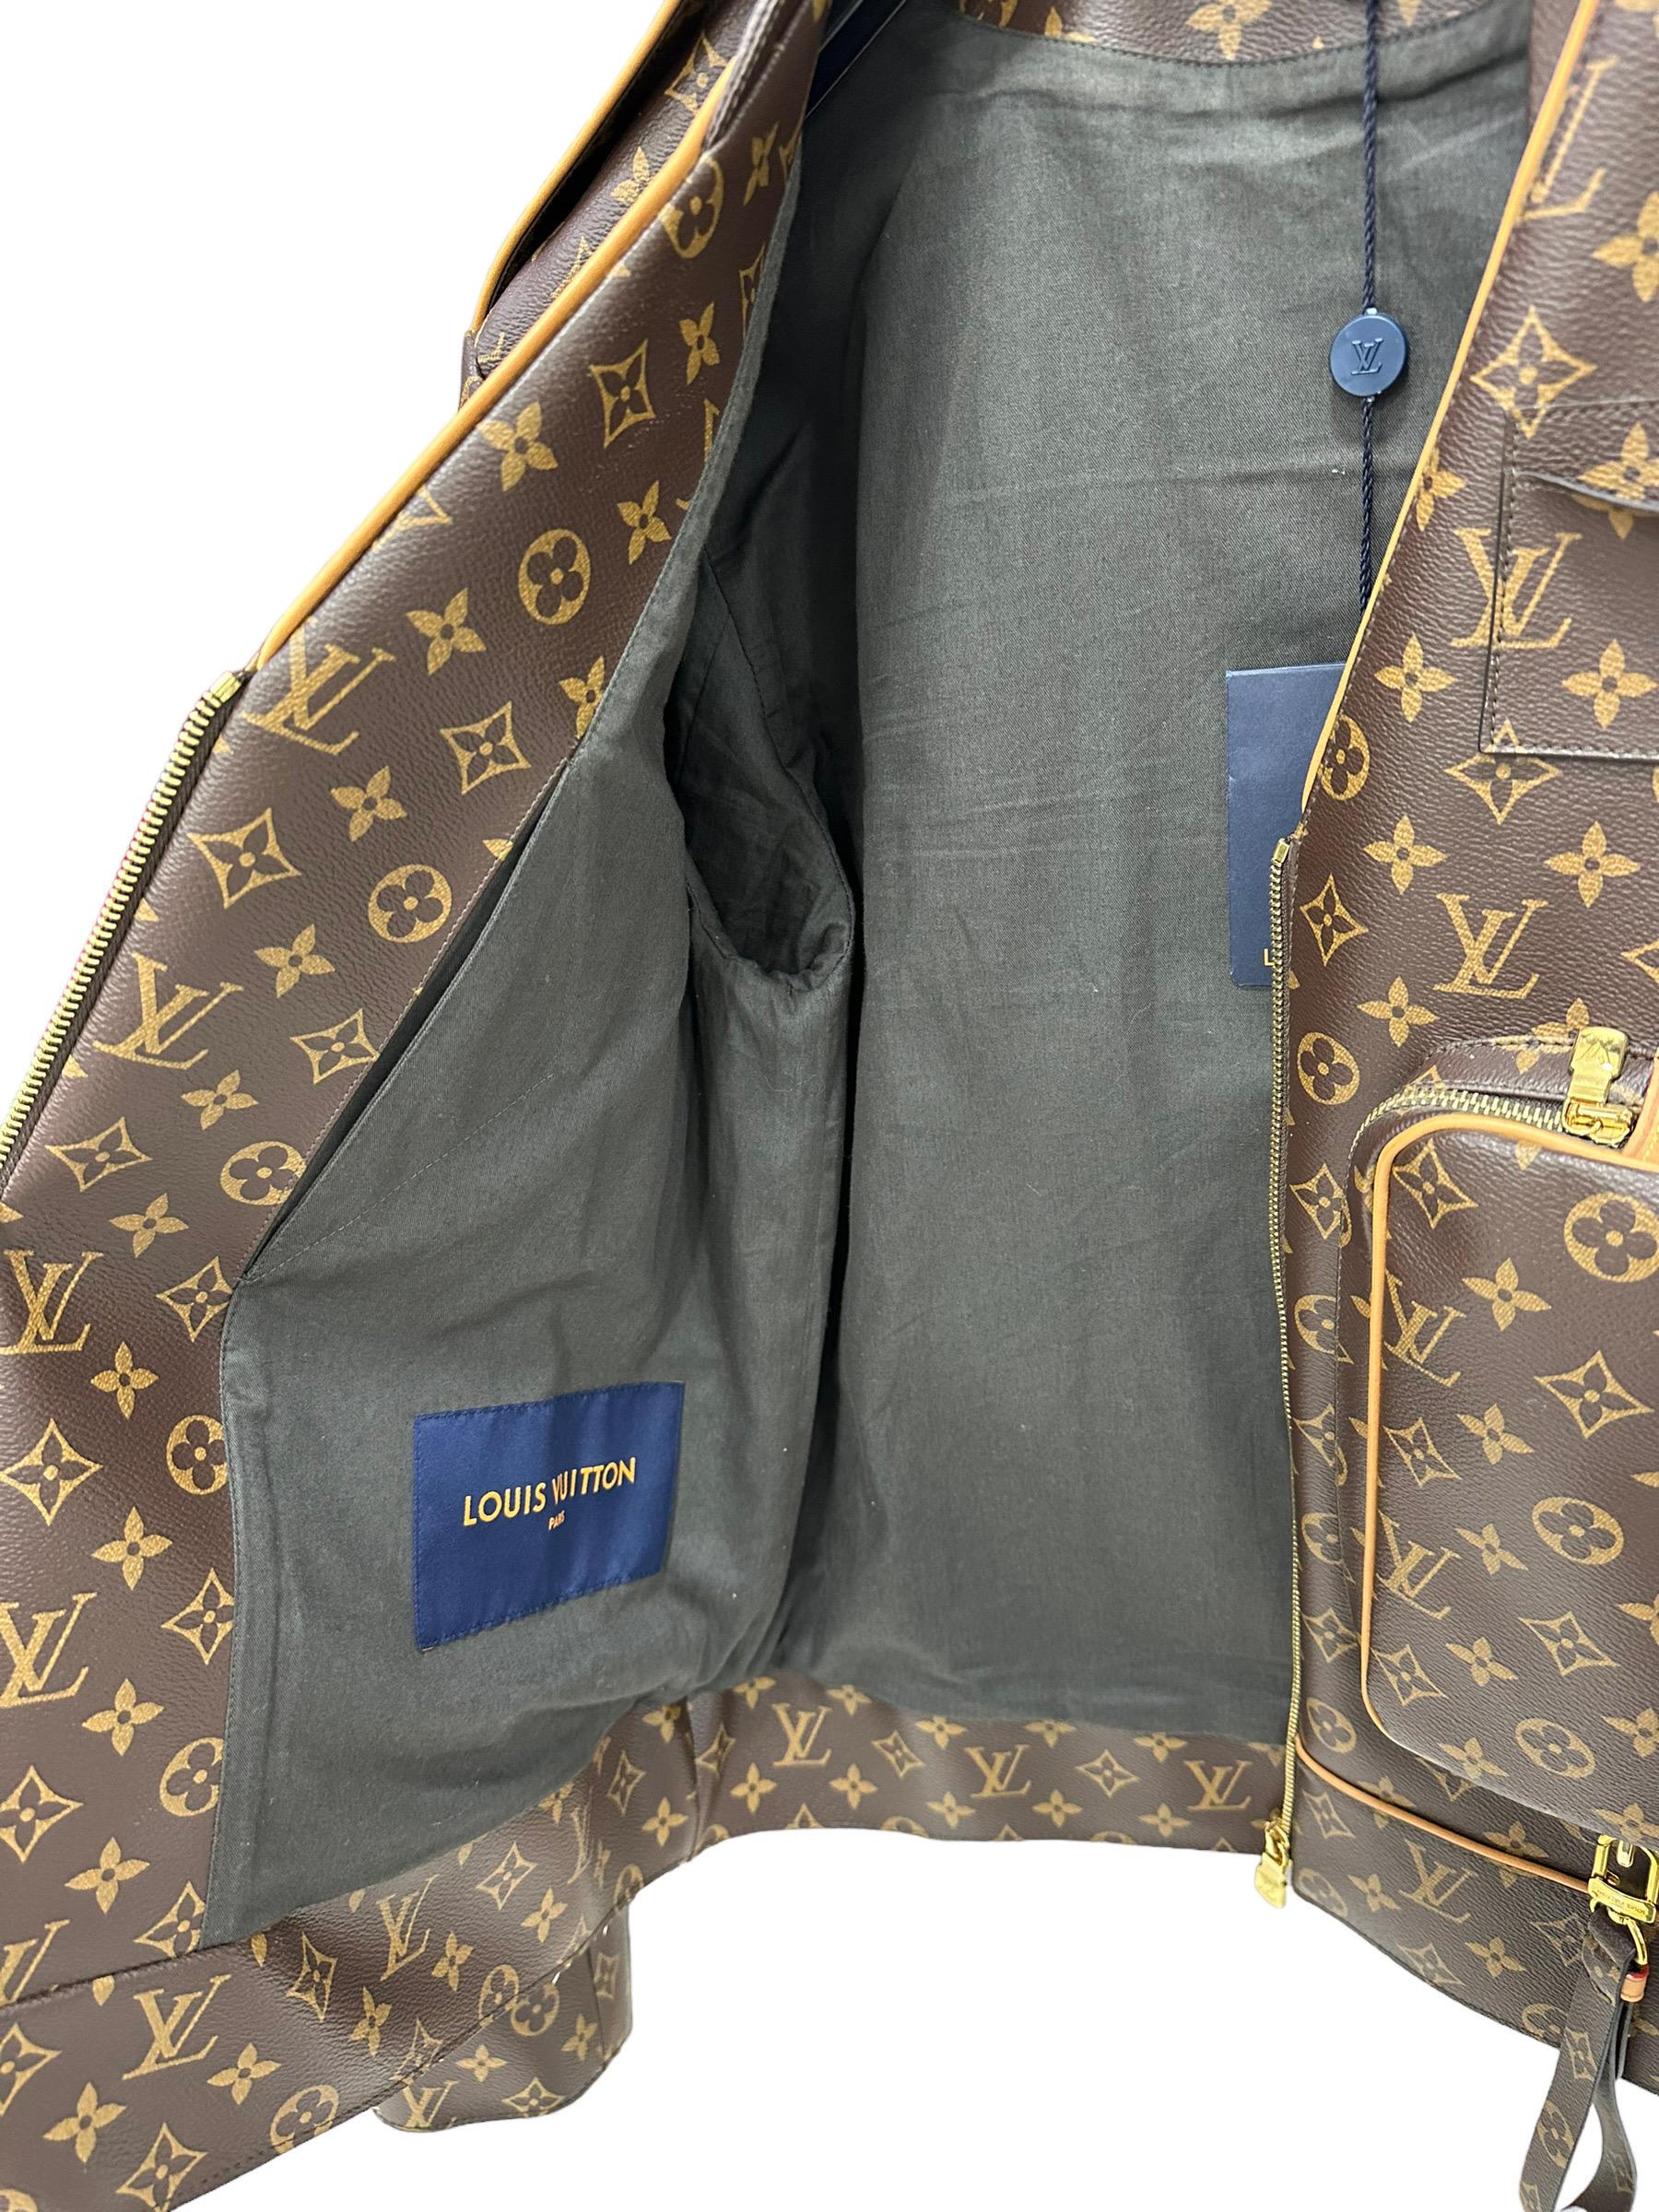 2019 Louis Vuitton Monogram Leather Men's Jacket Limited Edition In New Condition For Sale In Torre Del Greco, IT